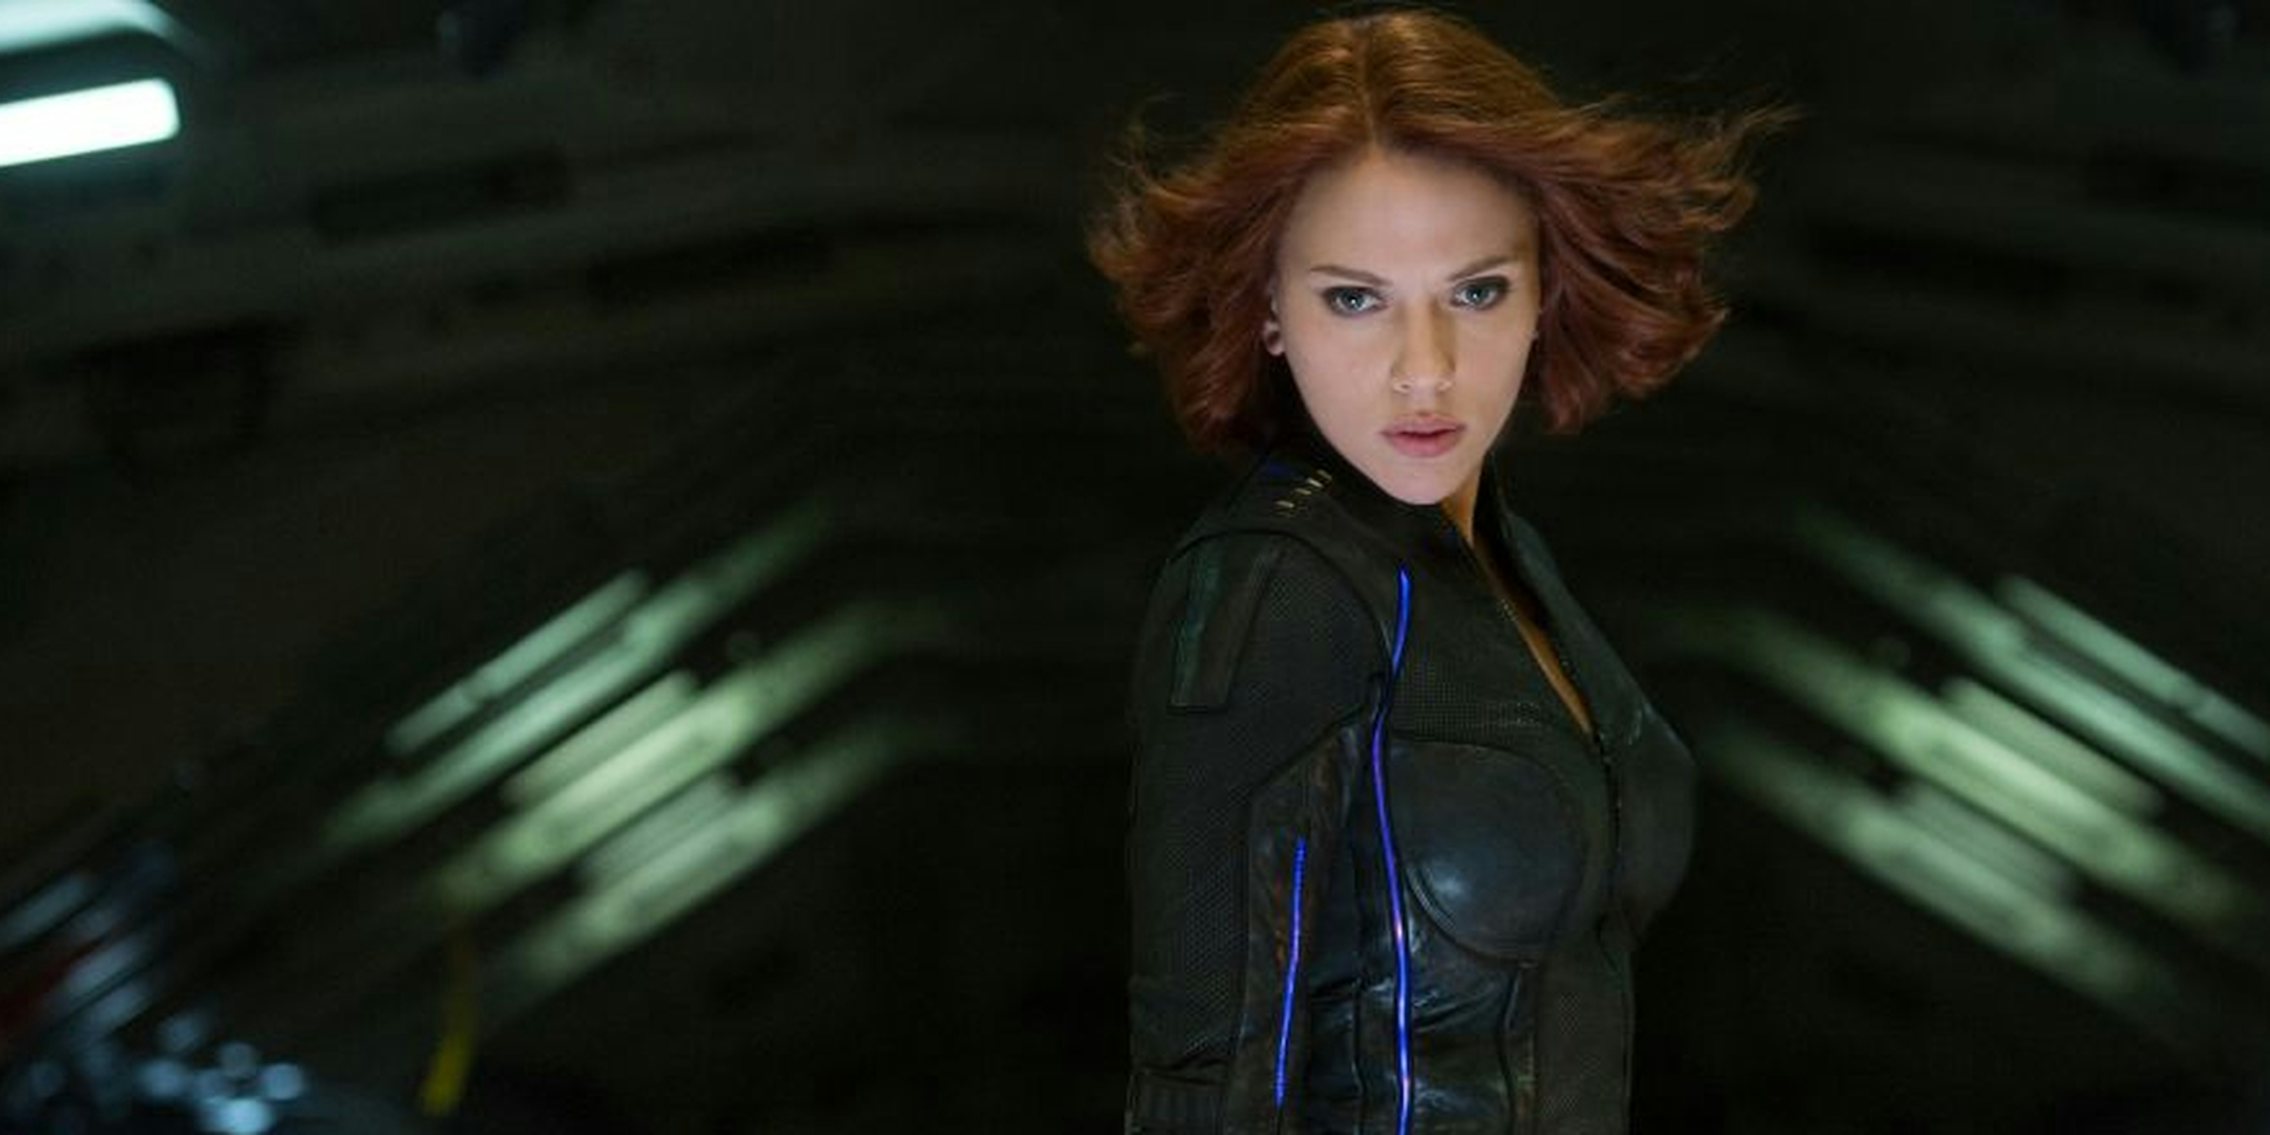 Marvel hired a screenwriter for a Black Widow standalone film.